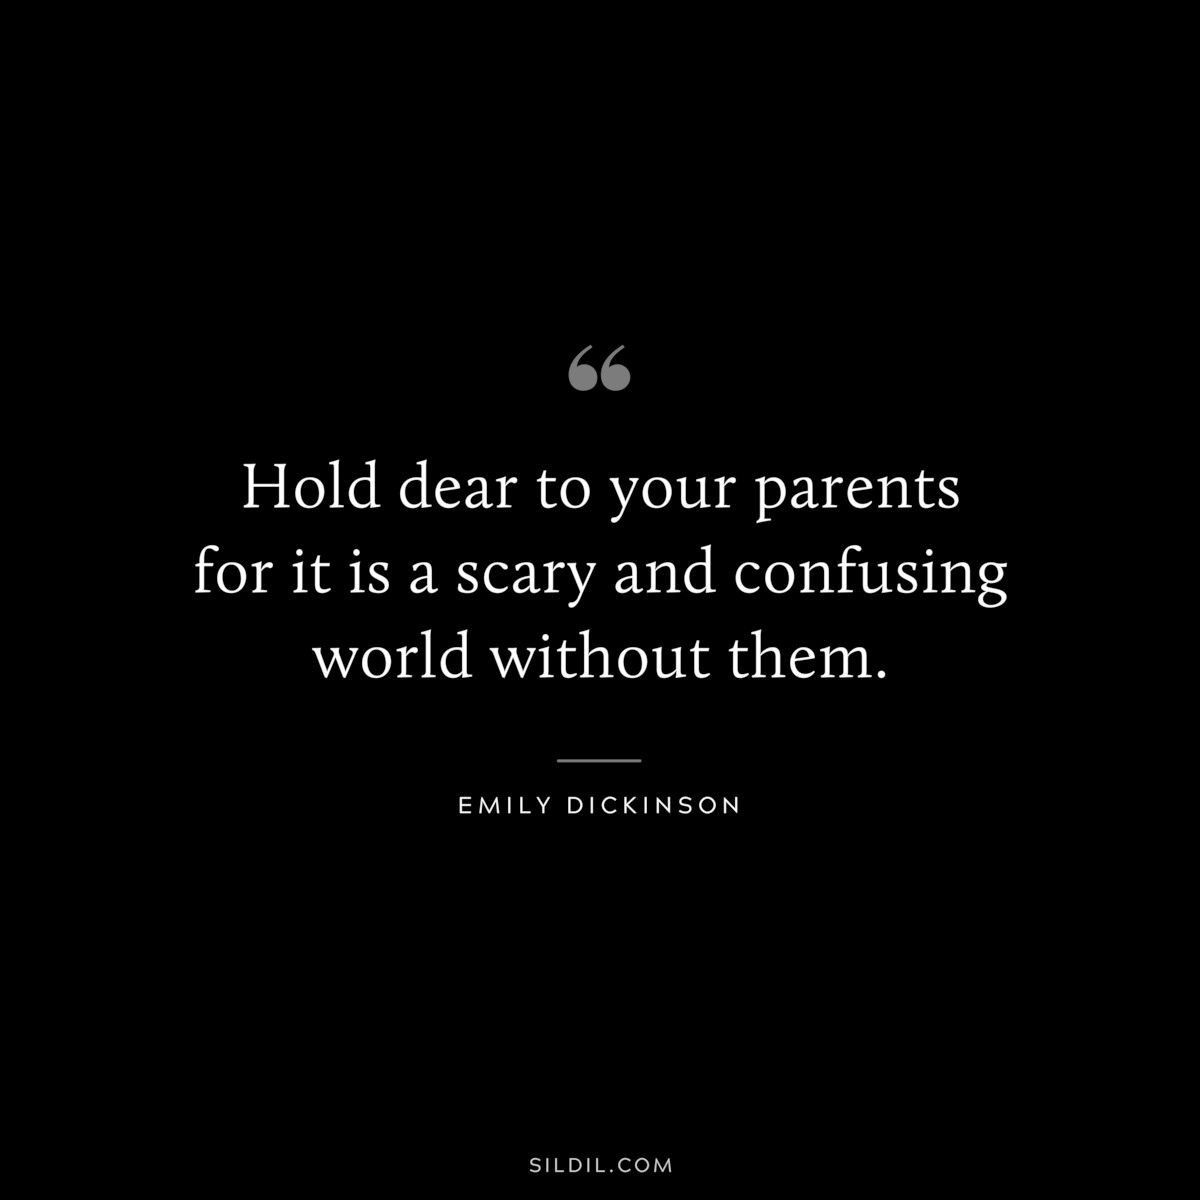 Hold dear to your parents for it is a scary and confusing world without them.